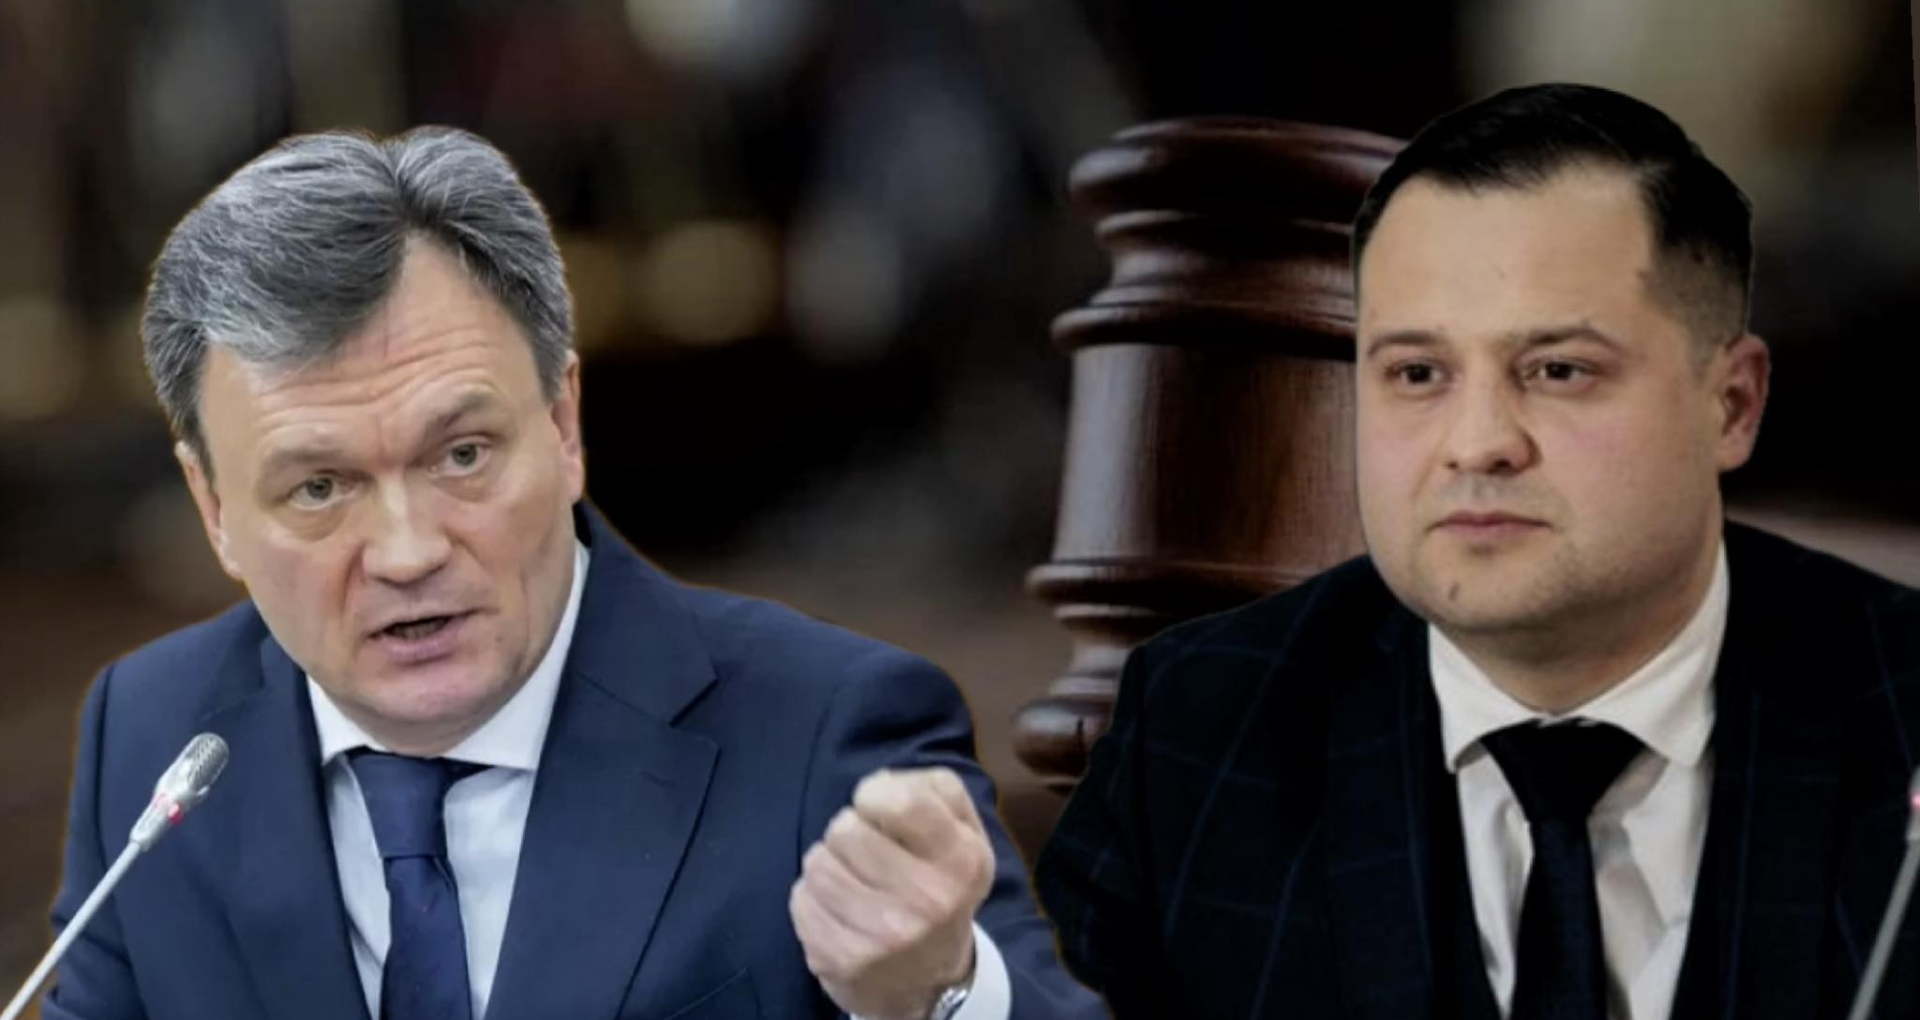 Igor Dodon’s first hearing in the Energocom case, postponed due to the absence of one of the magistrates